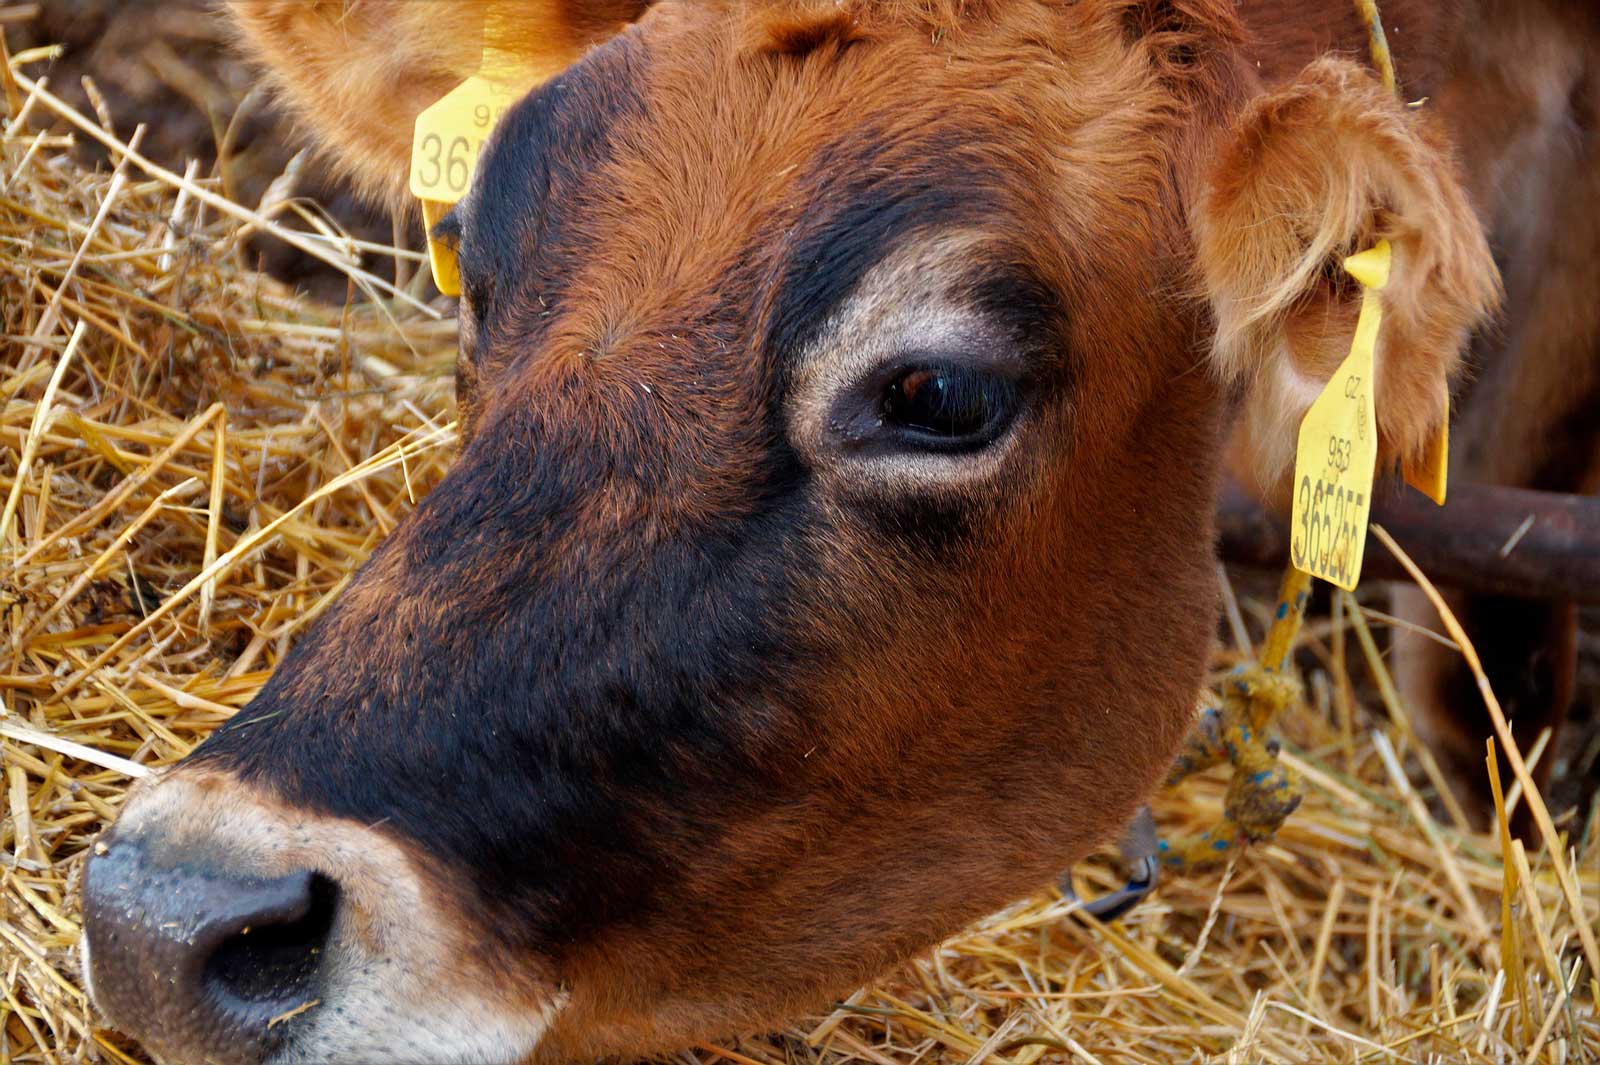 Incidence of copper toxicity in dairy cows